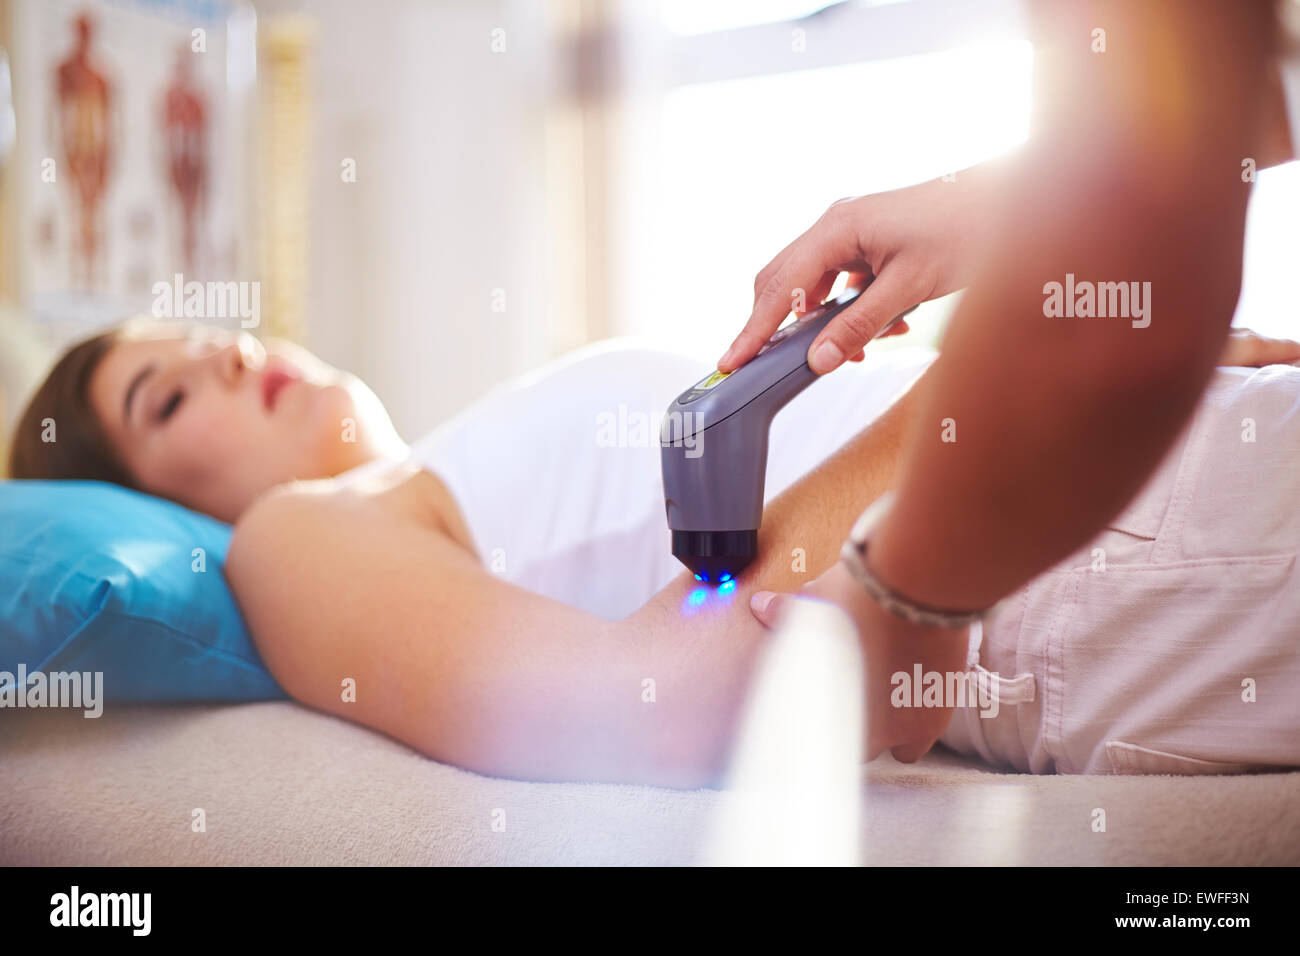 Physical therapist using ultrasound probe on woman’s arm Stock Photo